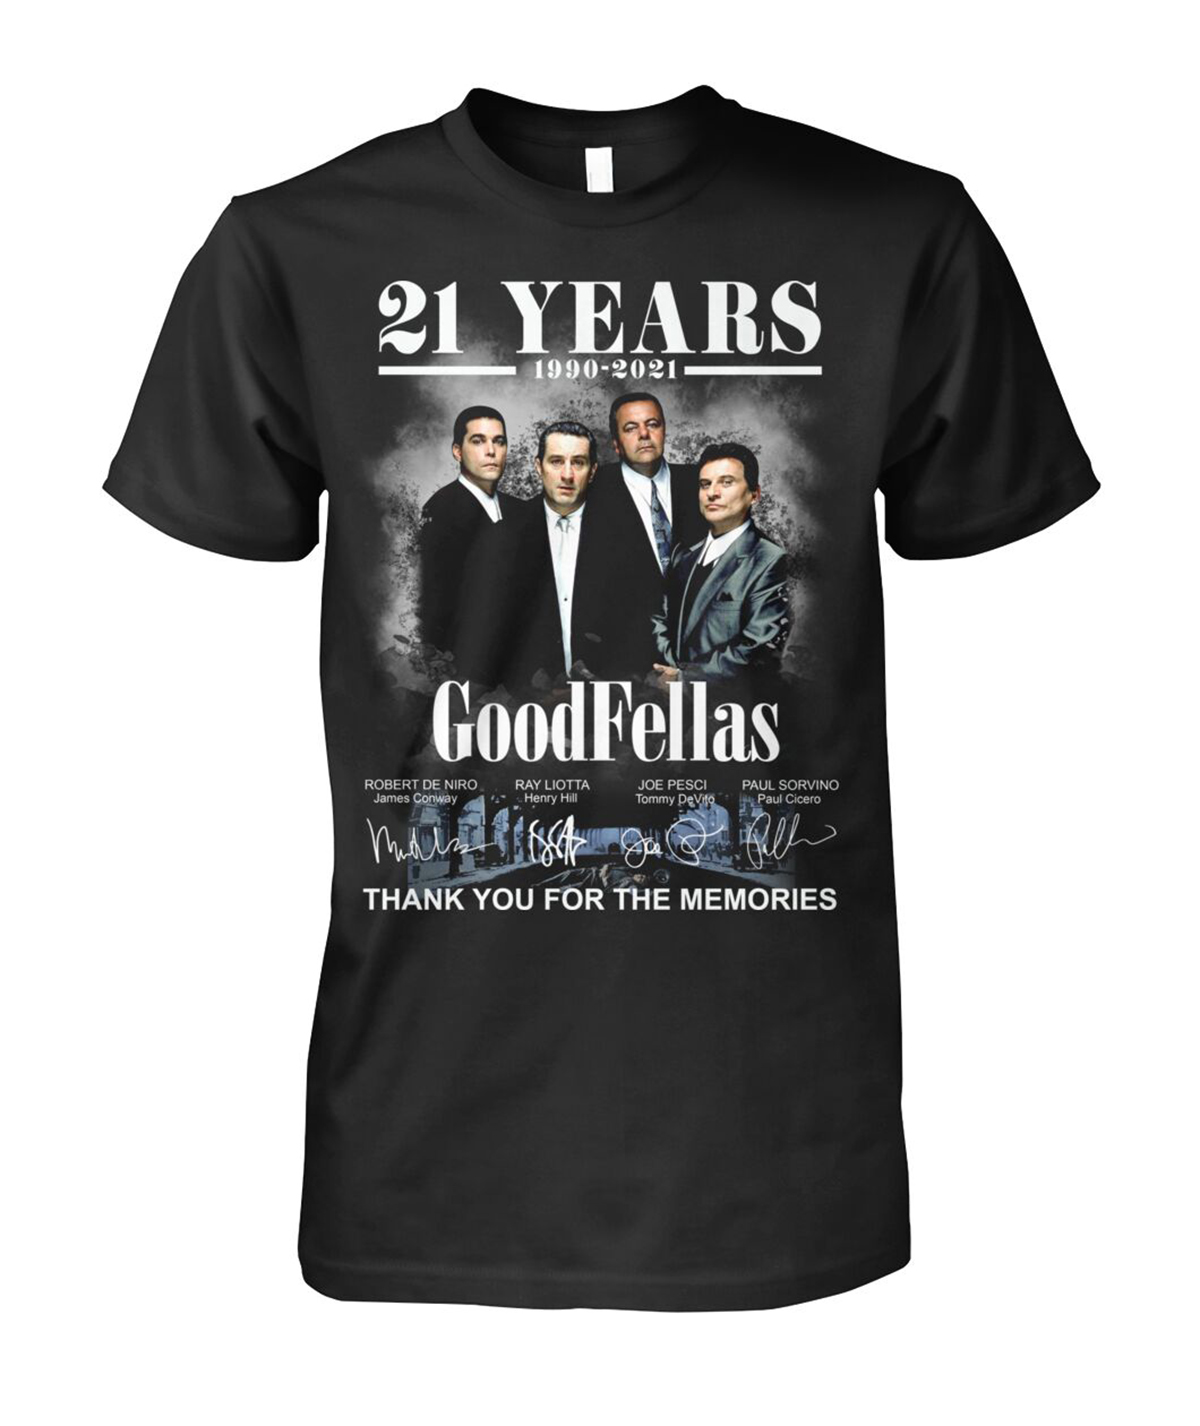 21 years GoodFellas thank you for the memories shirt